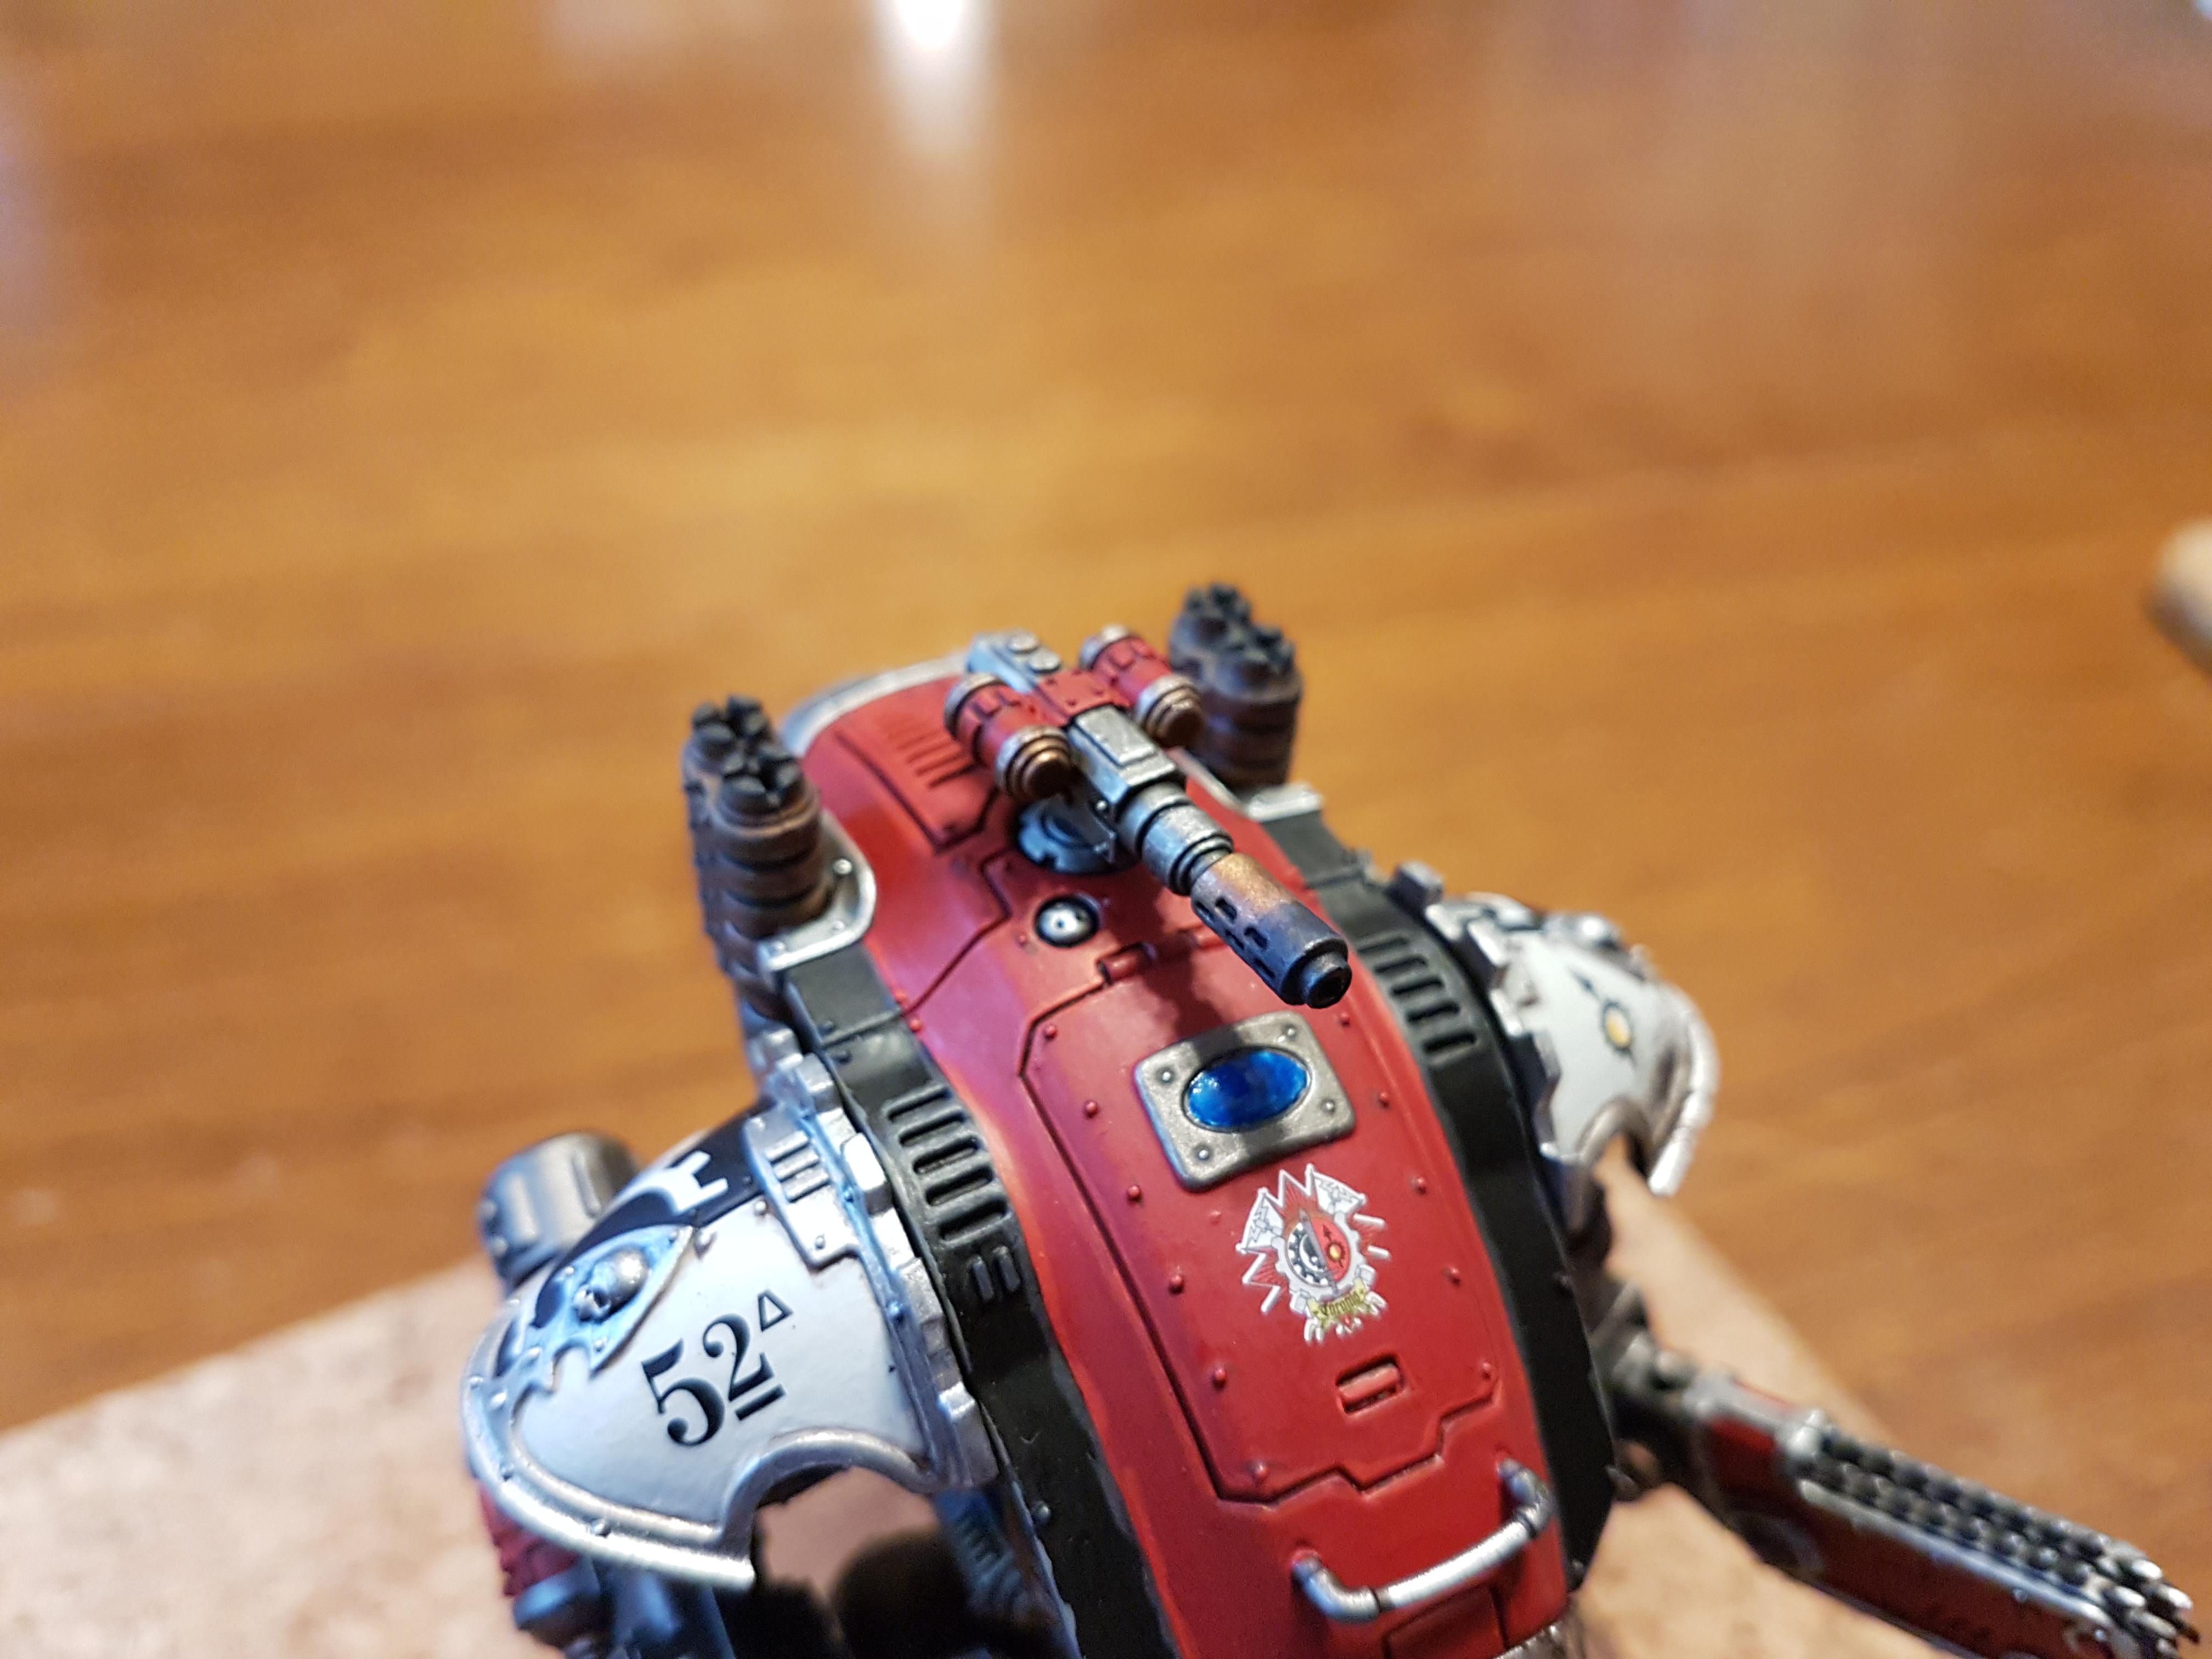 Armiger, Armiger Warglaives, Black, House Taranis, Imperial, Imperial Knights, Knights, Meltagun, Reaper Chain-cleaver, Red, Taranis, Thermal Spear, Warglaives, White